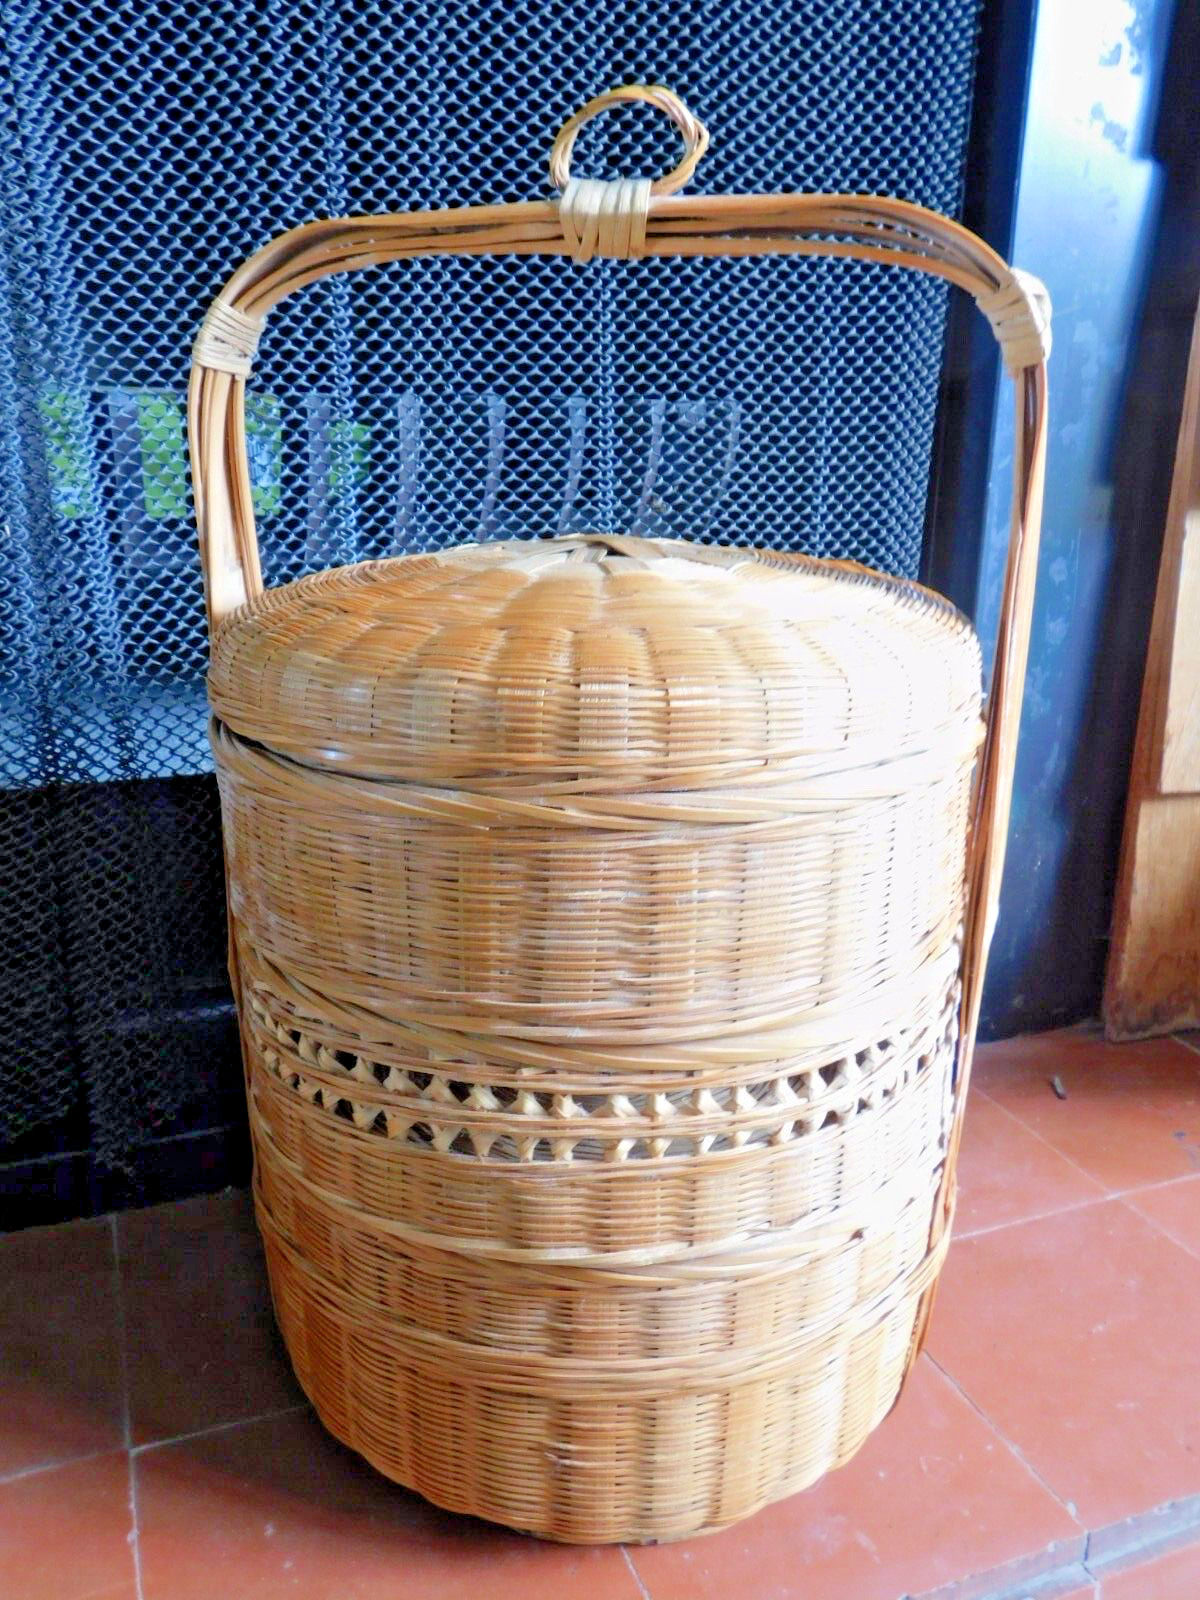 Vintage 3 Tier Chinese Asian Wedding Basket Woven Wicker Rattan Bamboo/Handle